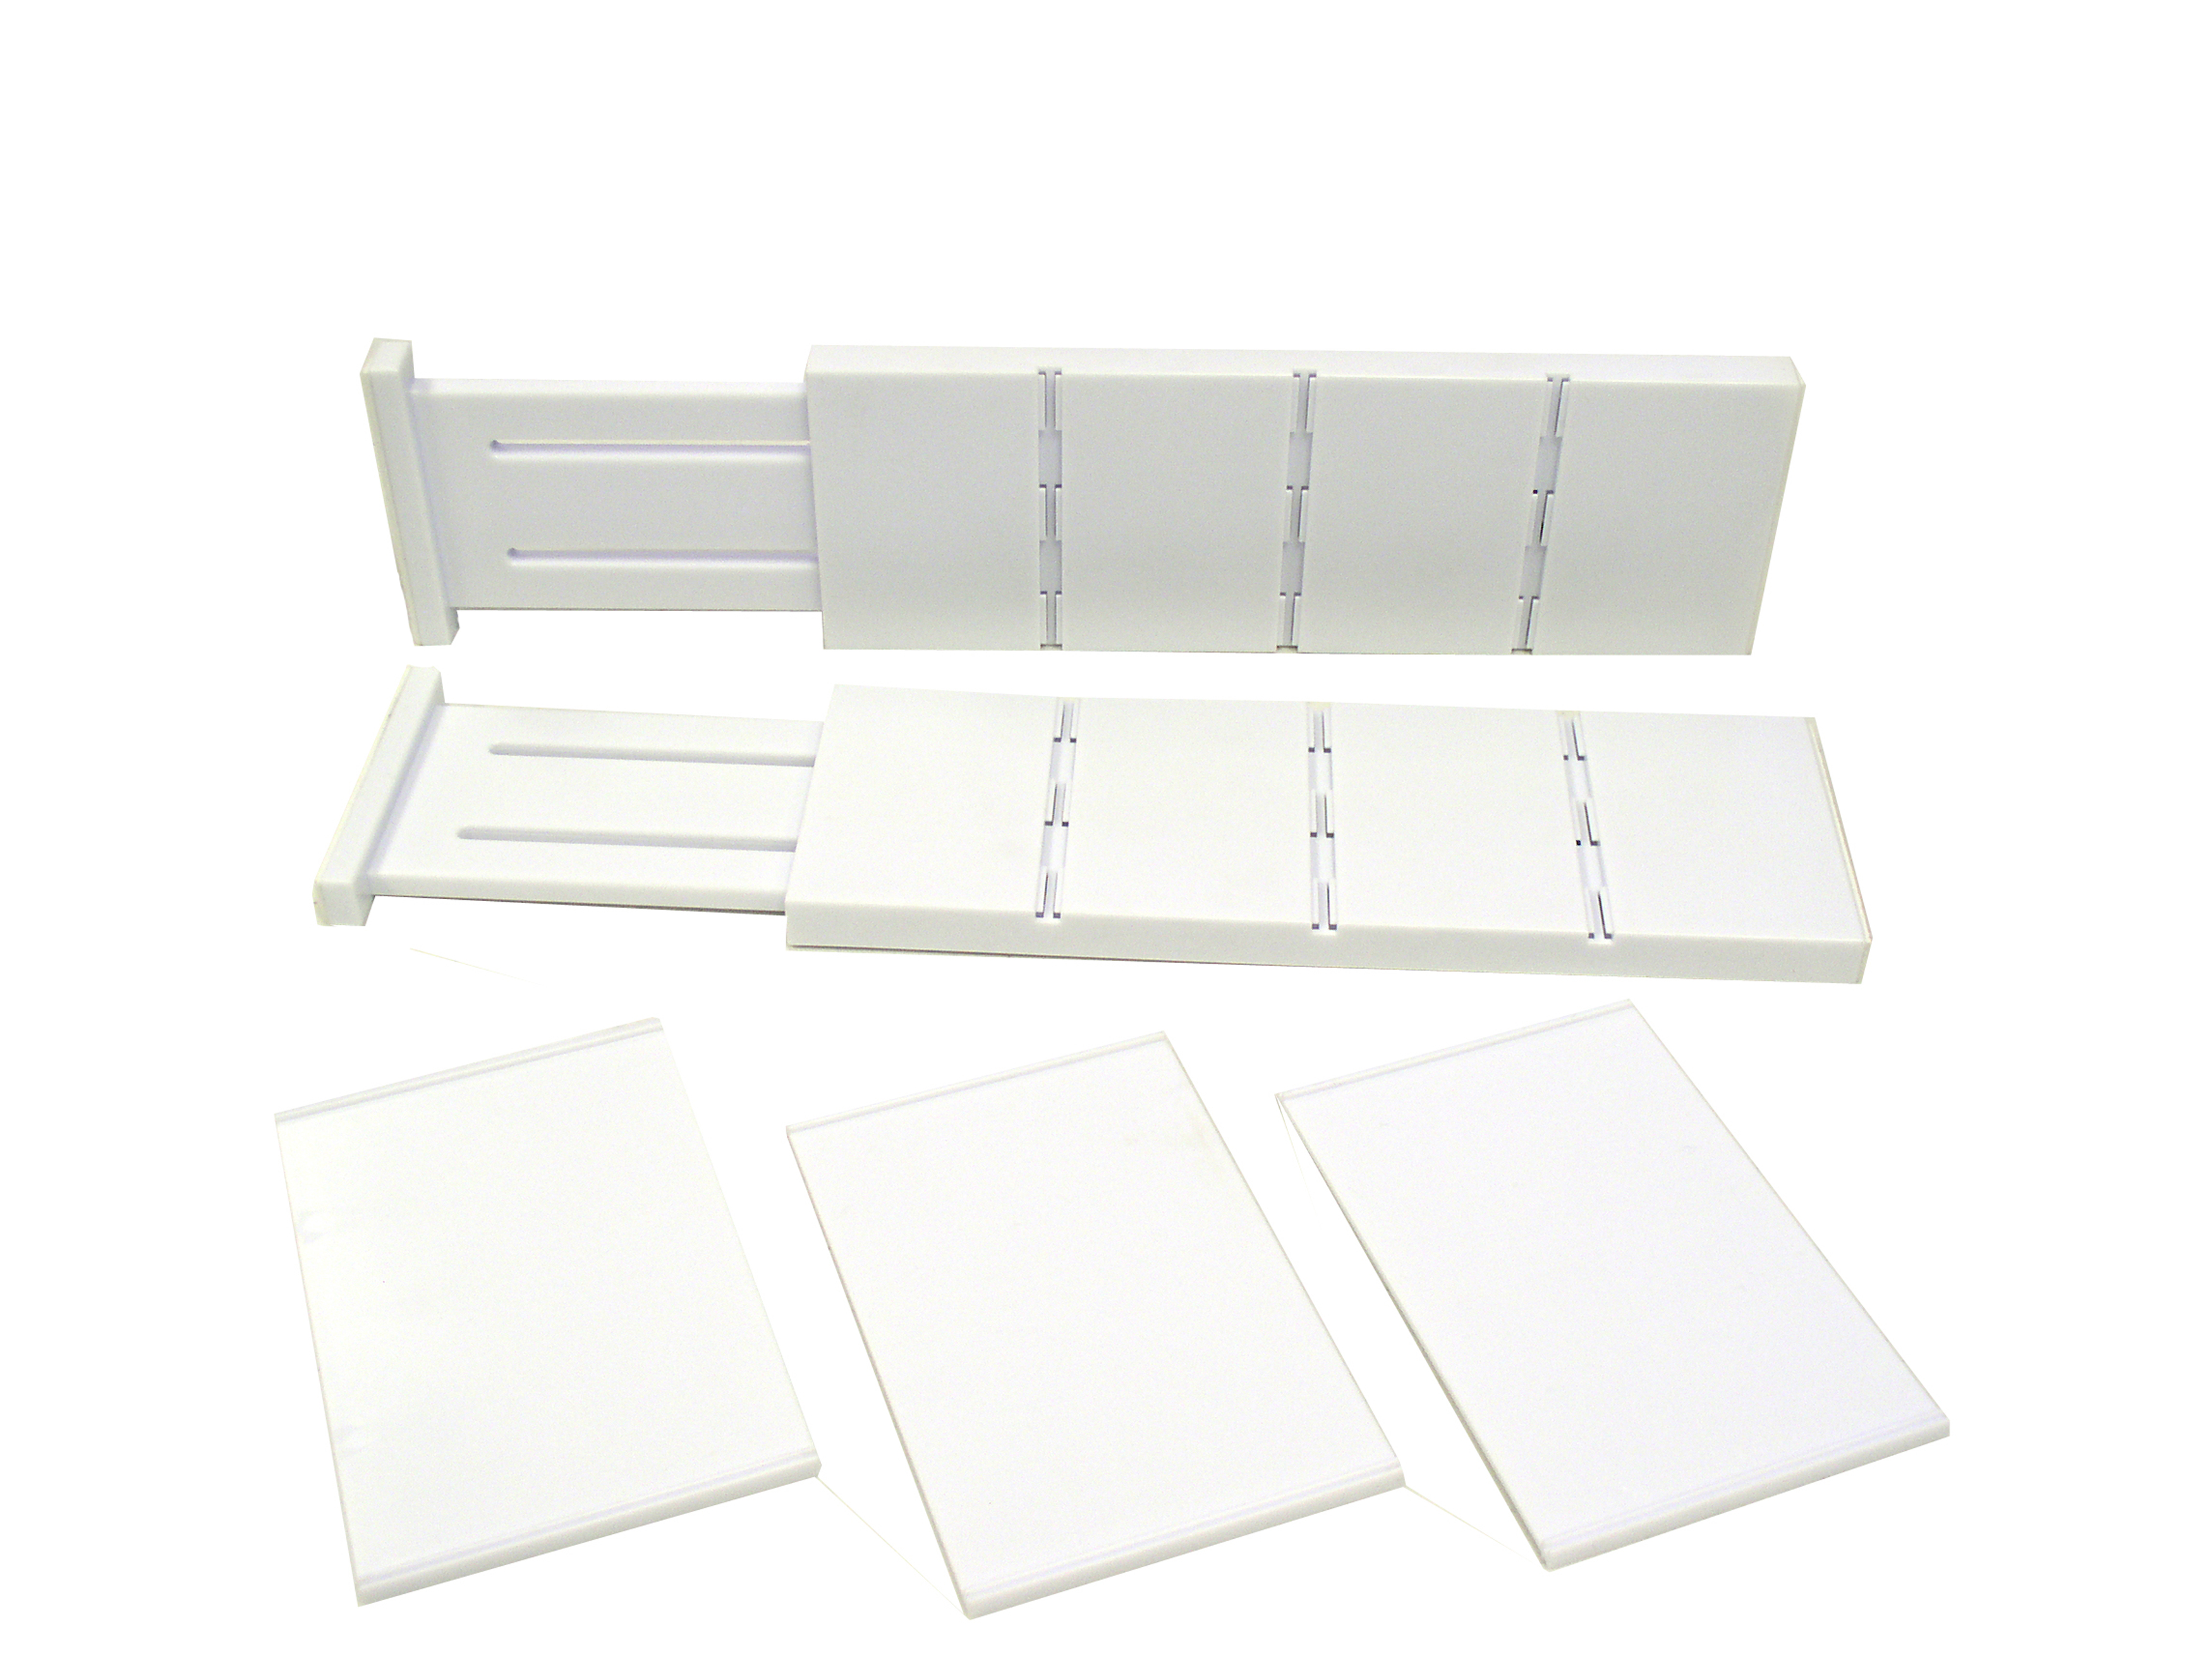 USA Patented White Plastic 5 PC Dresser Drawer Expandable Divider Set, for drawers 12" to 16" - image 4 of 5